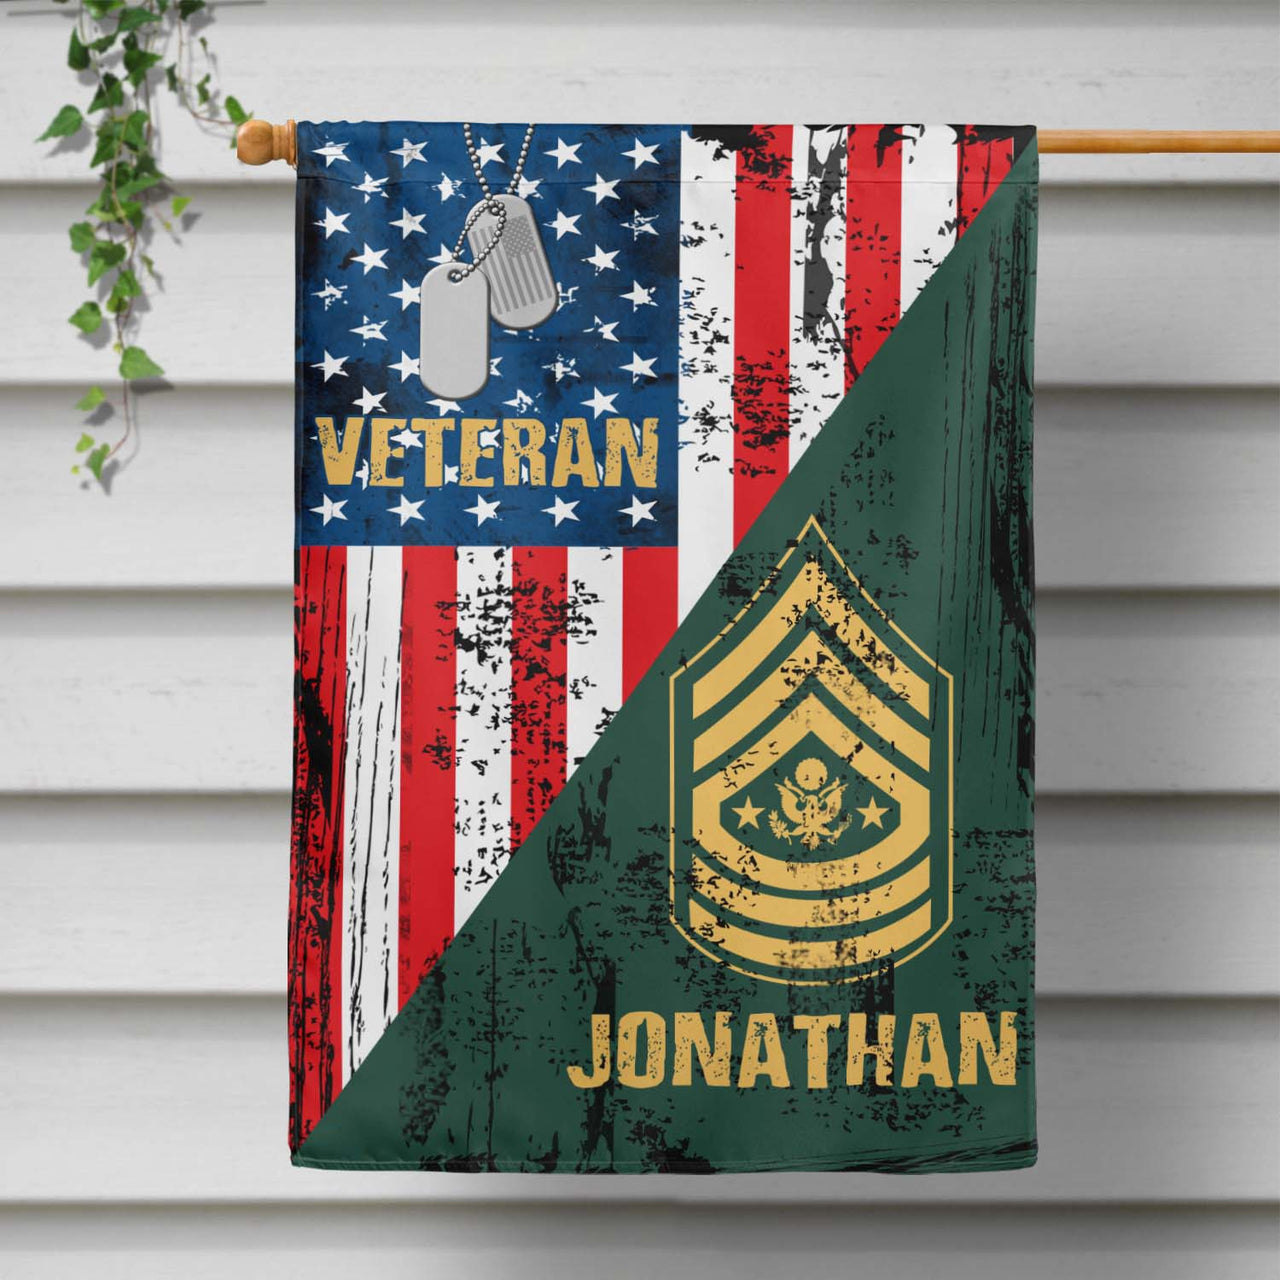 Personalized Custom Name Veteran Rank US Military Soldier Thin Green Line American Flag Garden House Flag Yard Lawn Sign